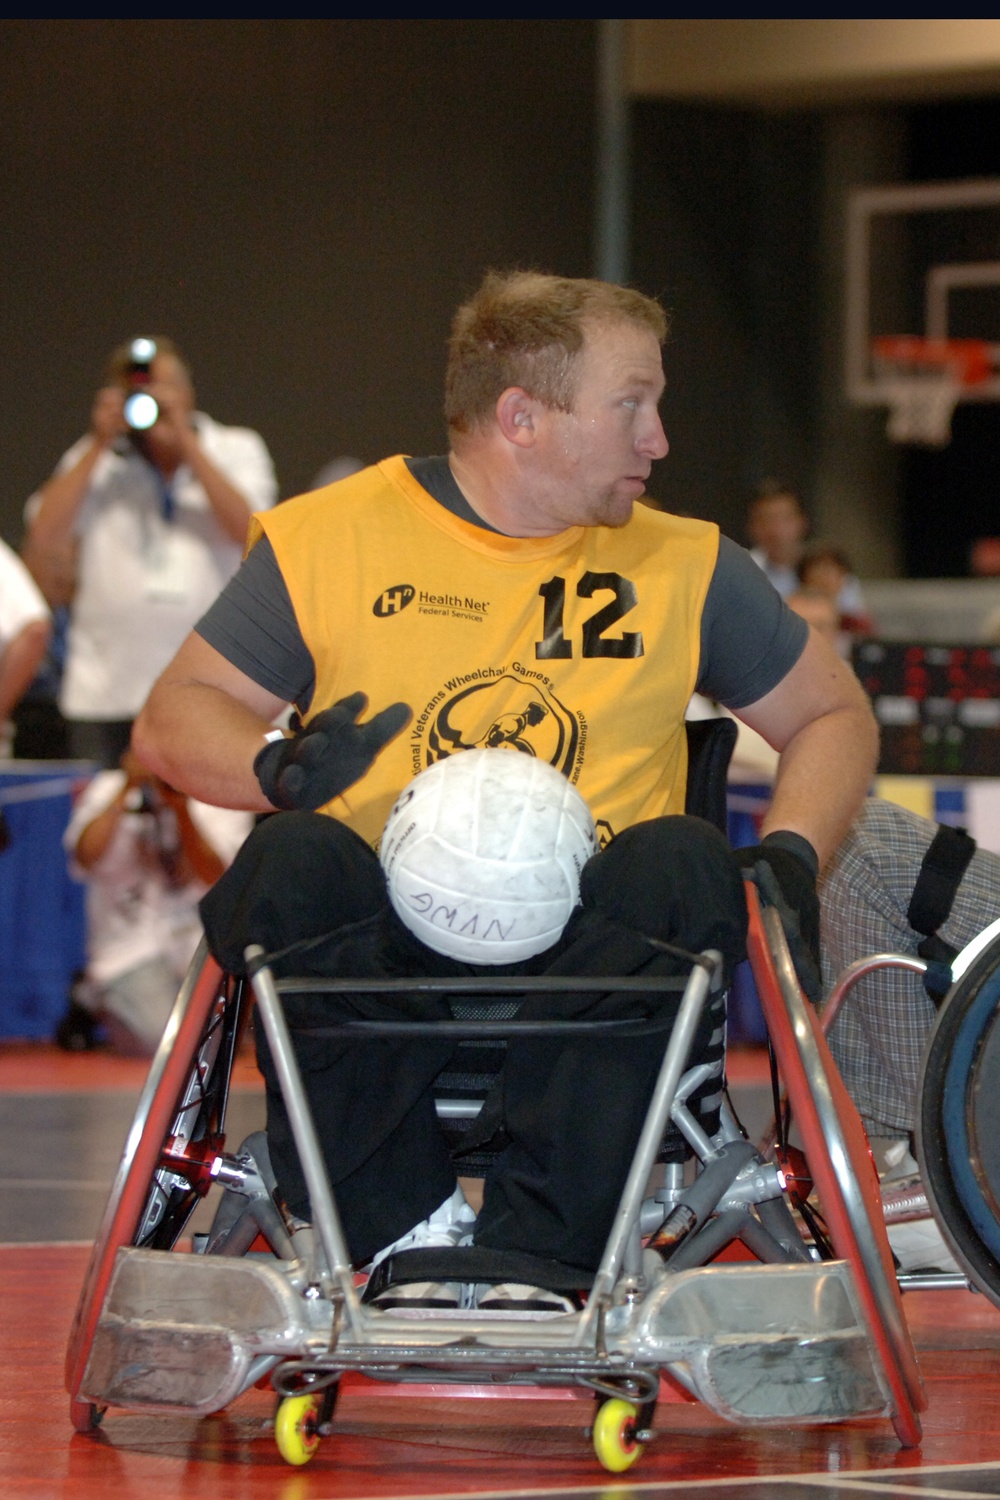 DVIDS Images National Veterans Wheelchair Games [Image 1 of 5]